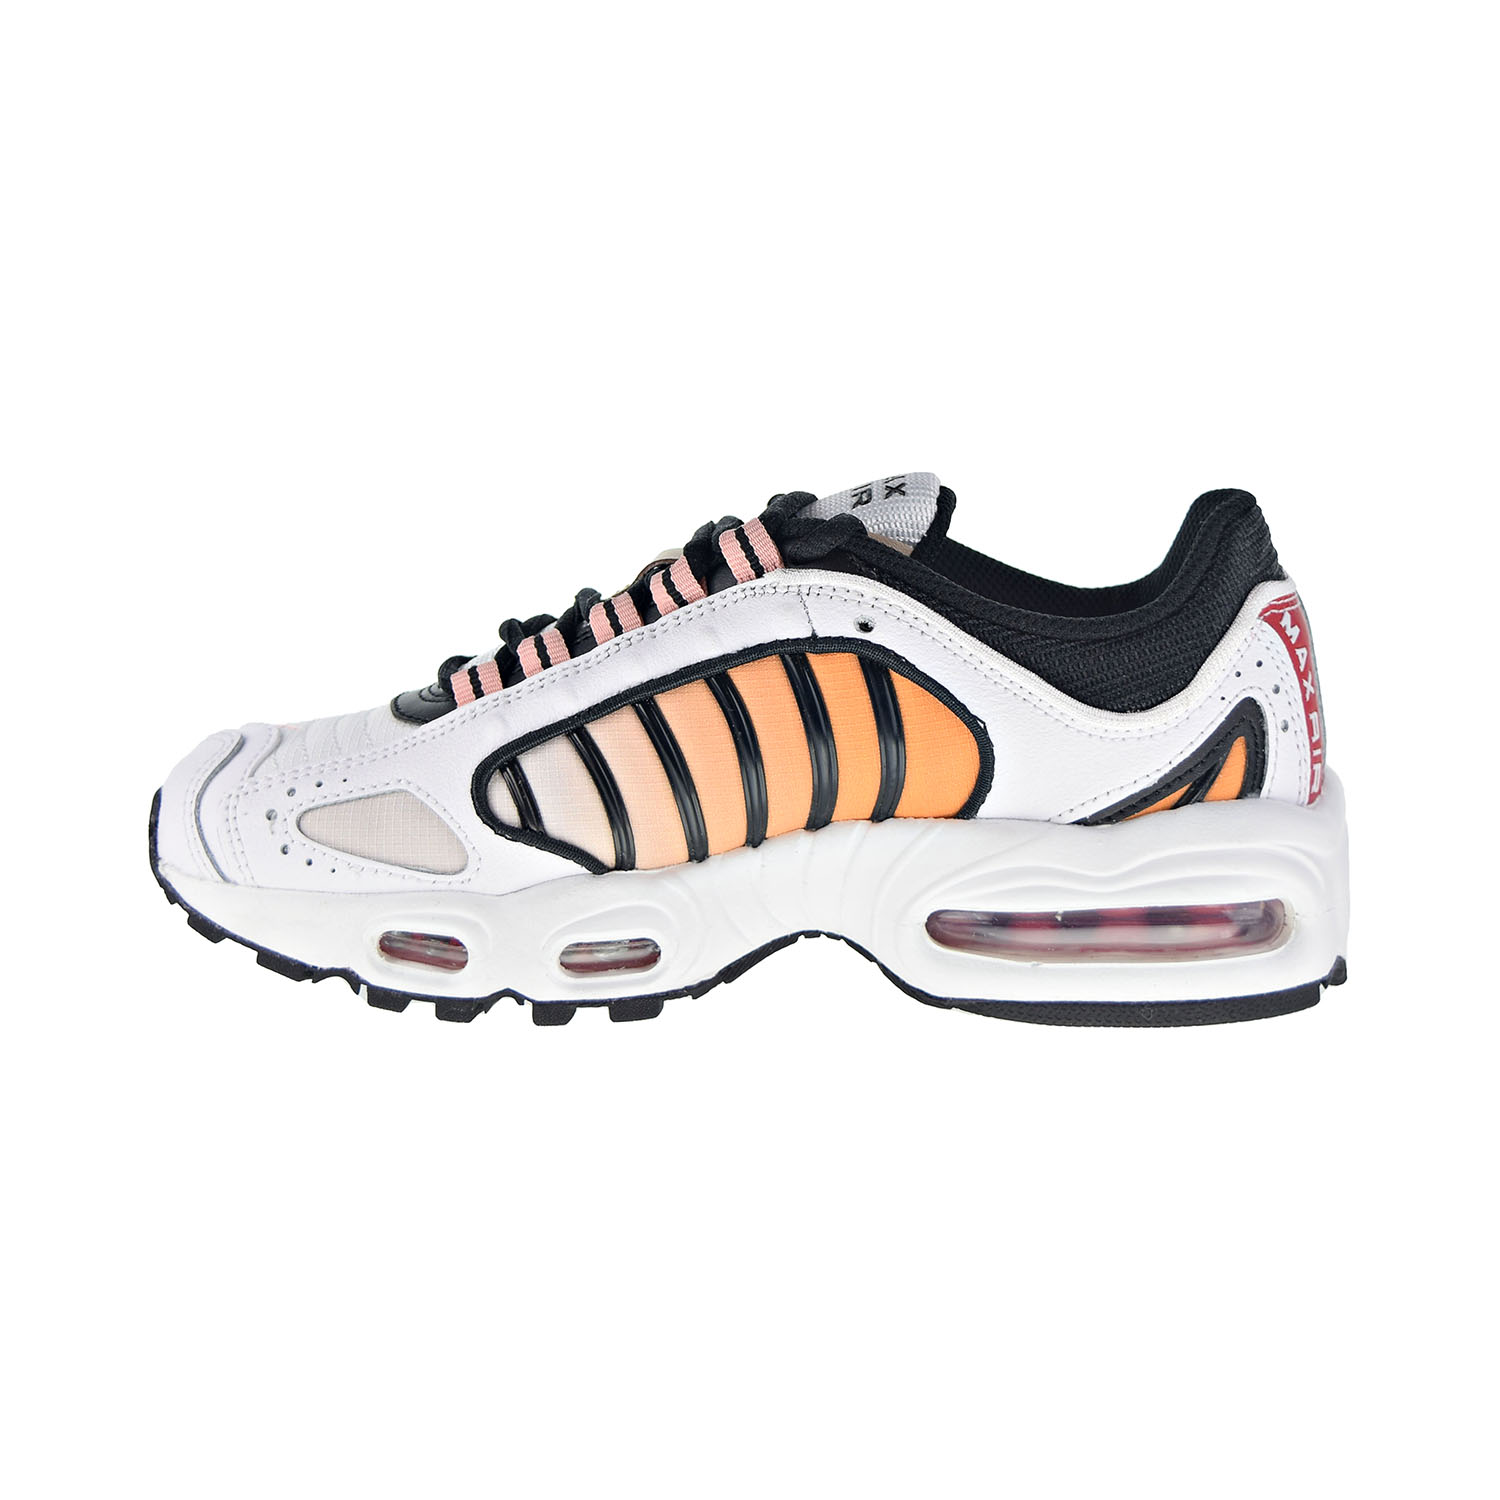 Nike Air Max Tailwind 4 Women's Shoes White-Black-Coral Stardust-Gym Red cj7976-100 - image 4 of 6